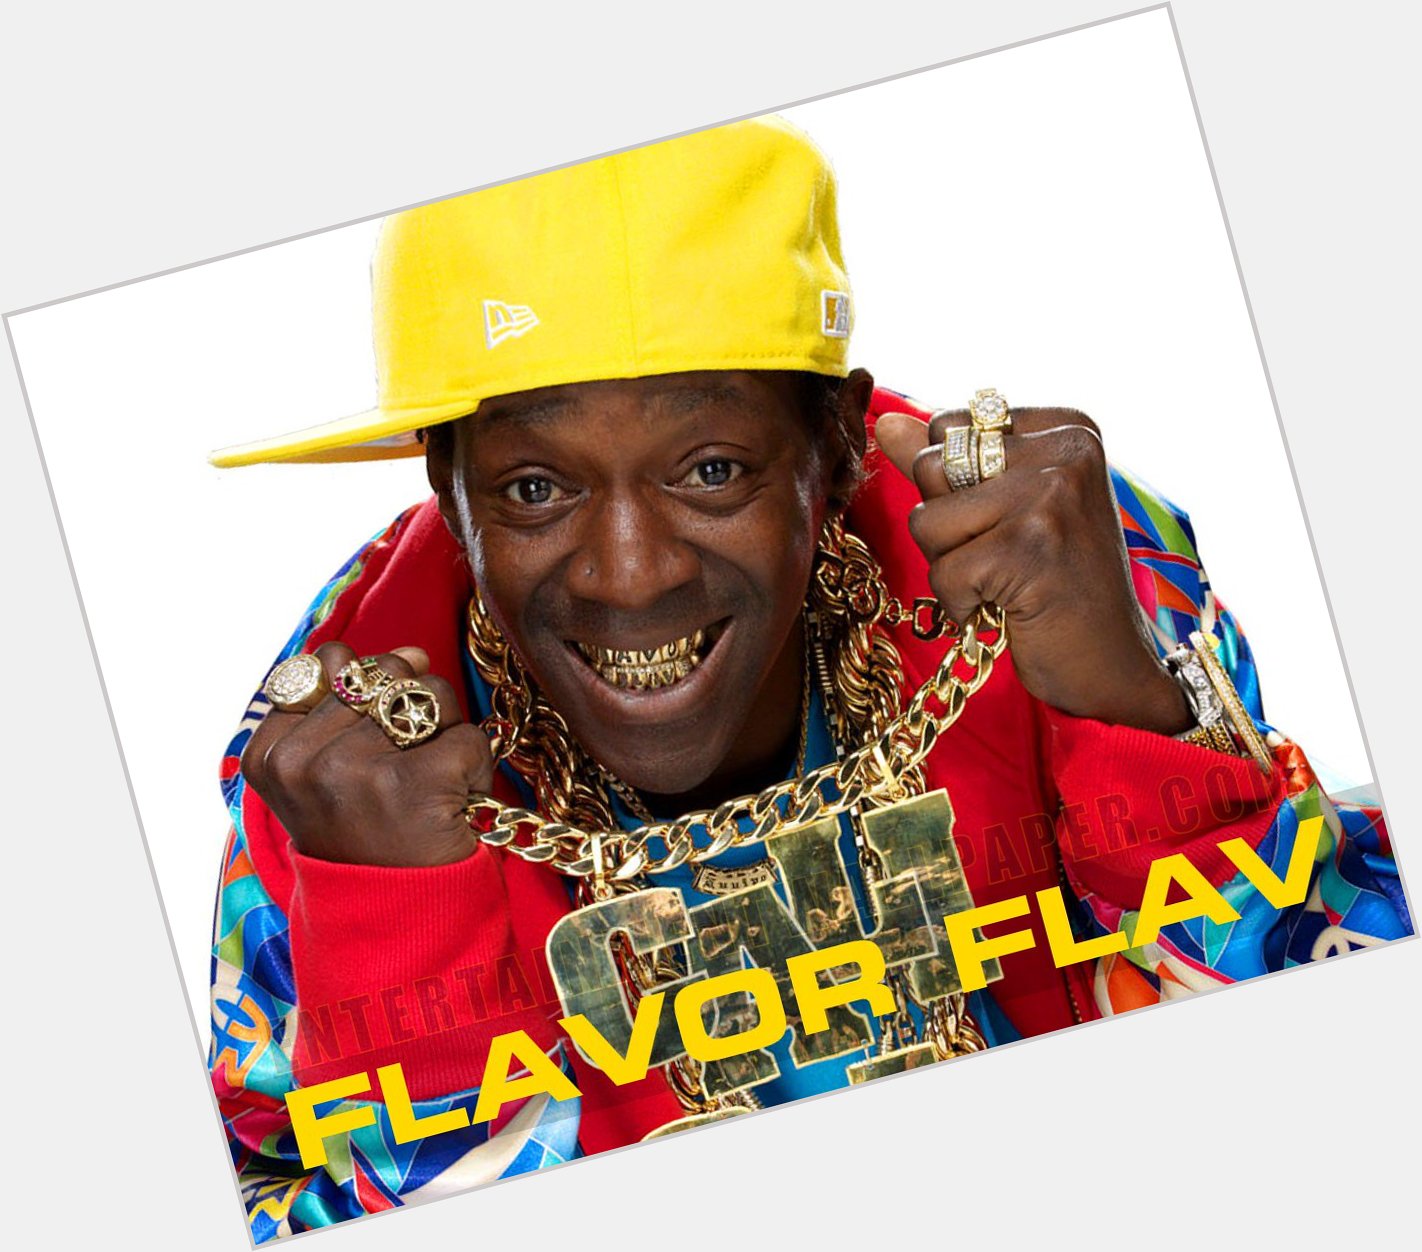  ON WITH Wishes:
Flavor Flav A Happy Birthday! 